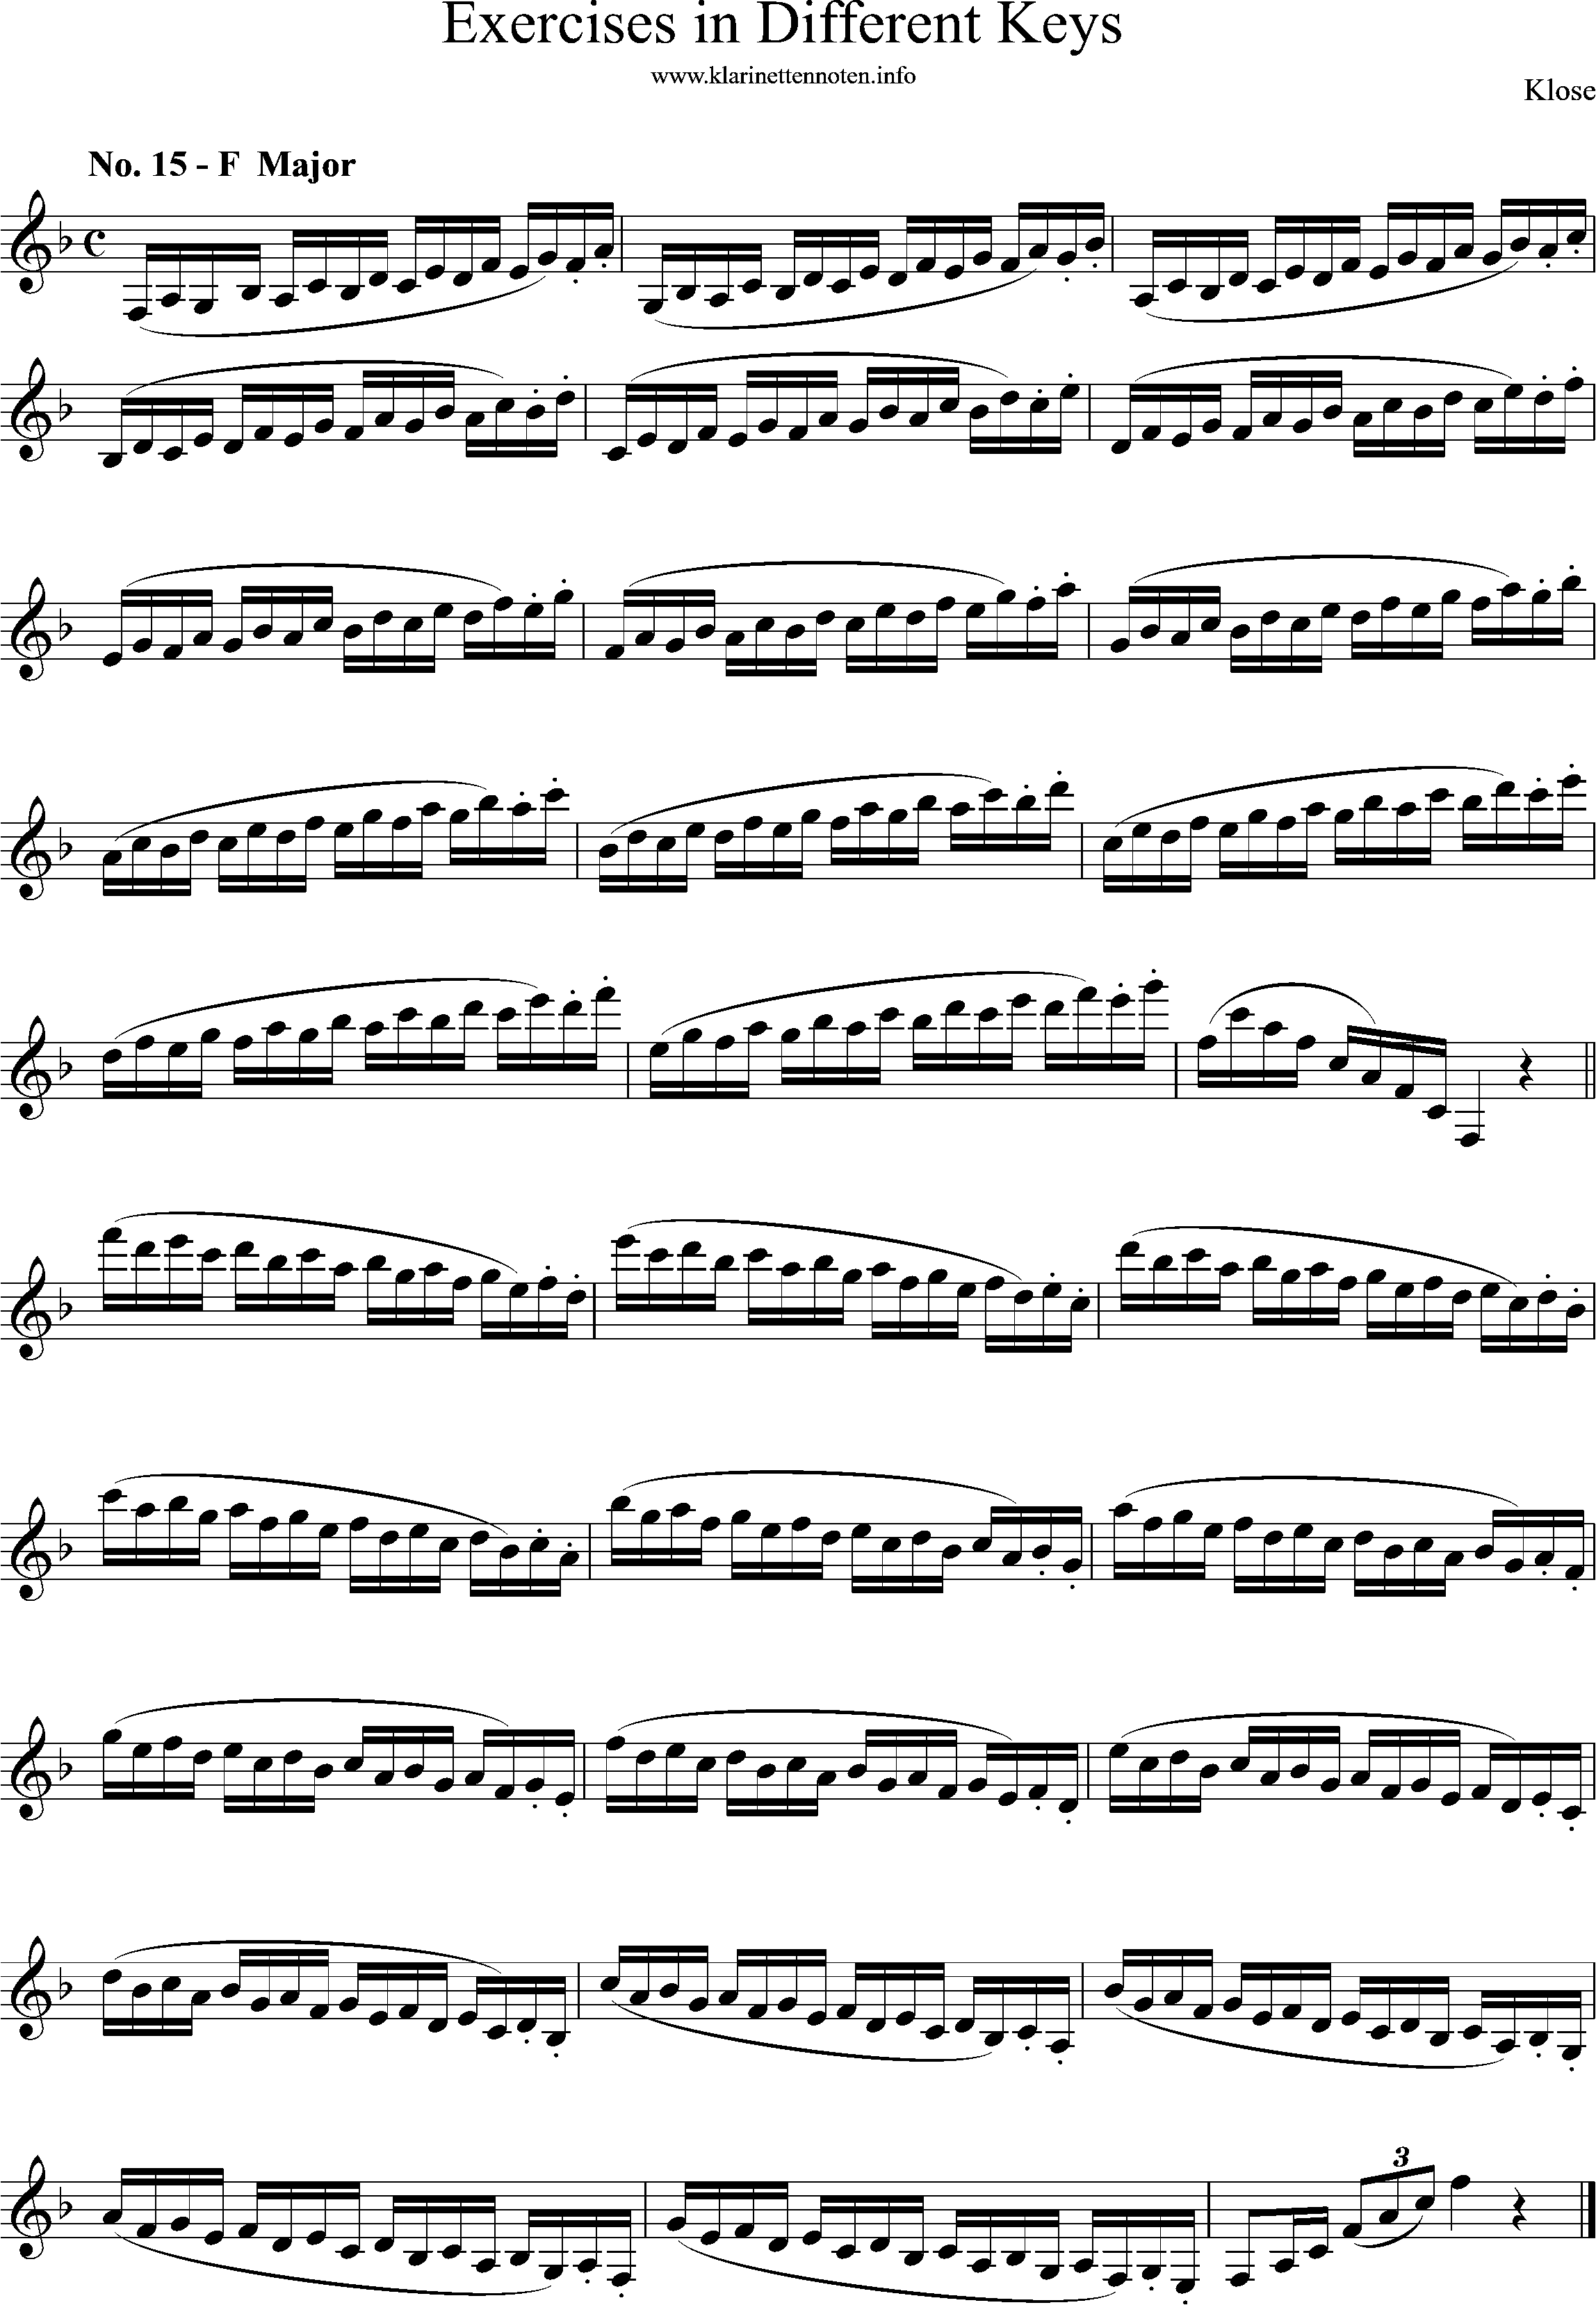 Exercises in Differewnt Keys, klose, No-15, F-Major